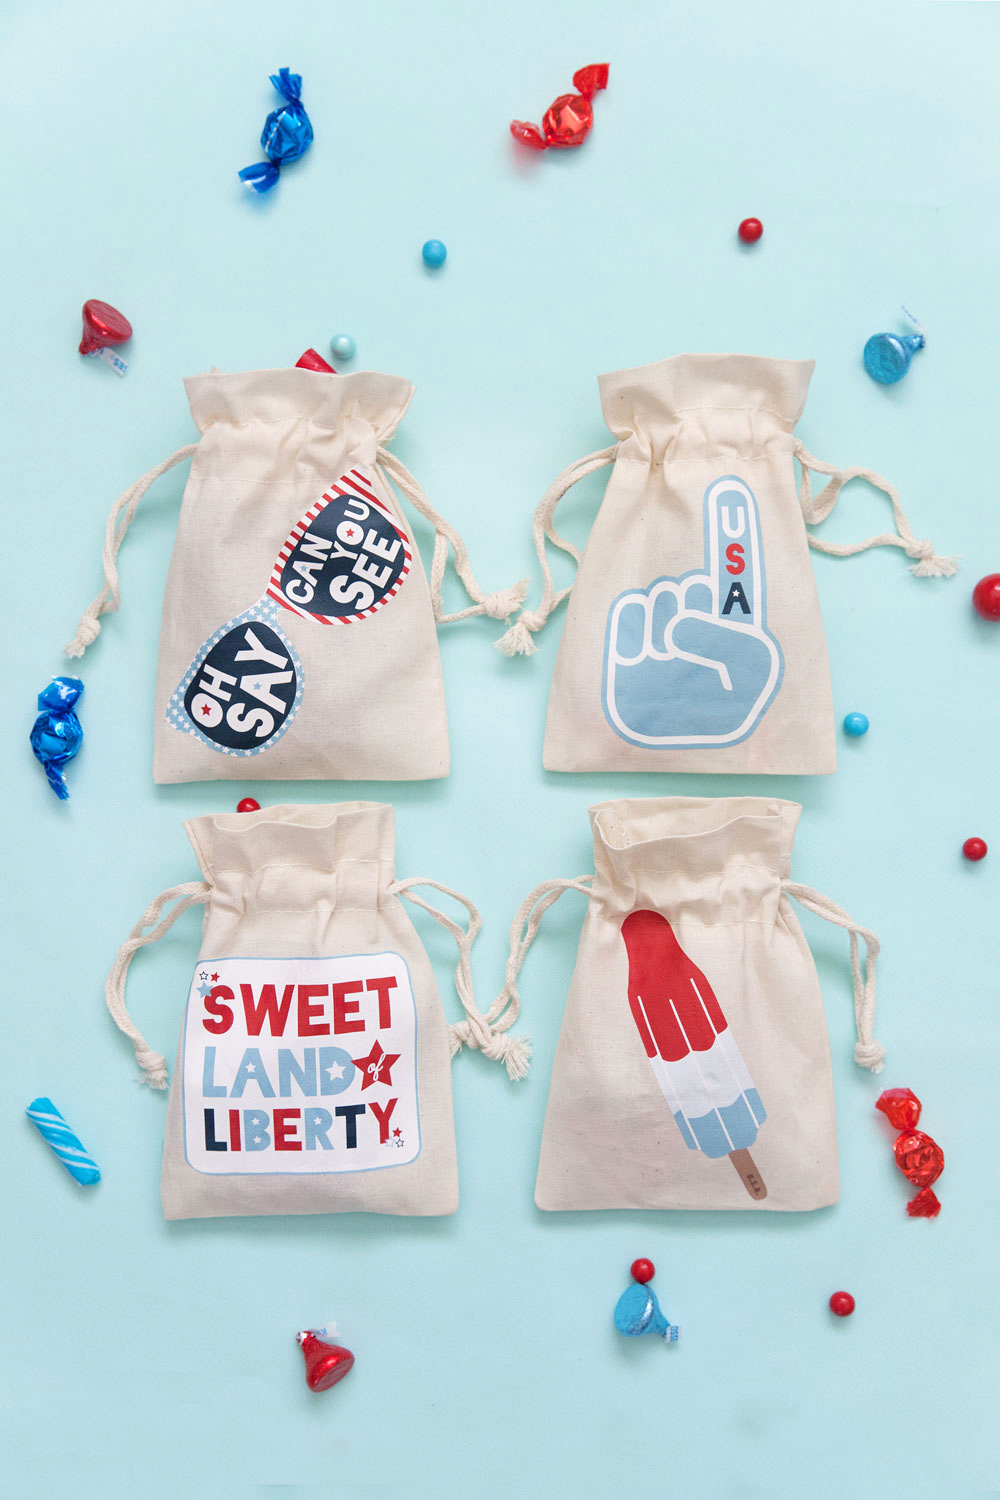 Make these 4th of July Goodie Bags in 5 min with these free iron on printables